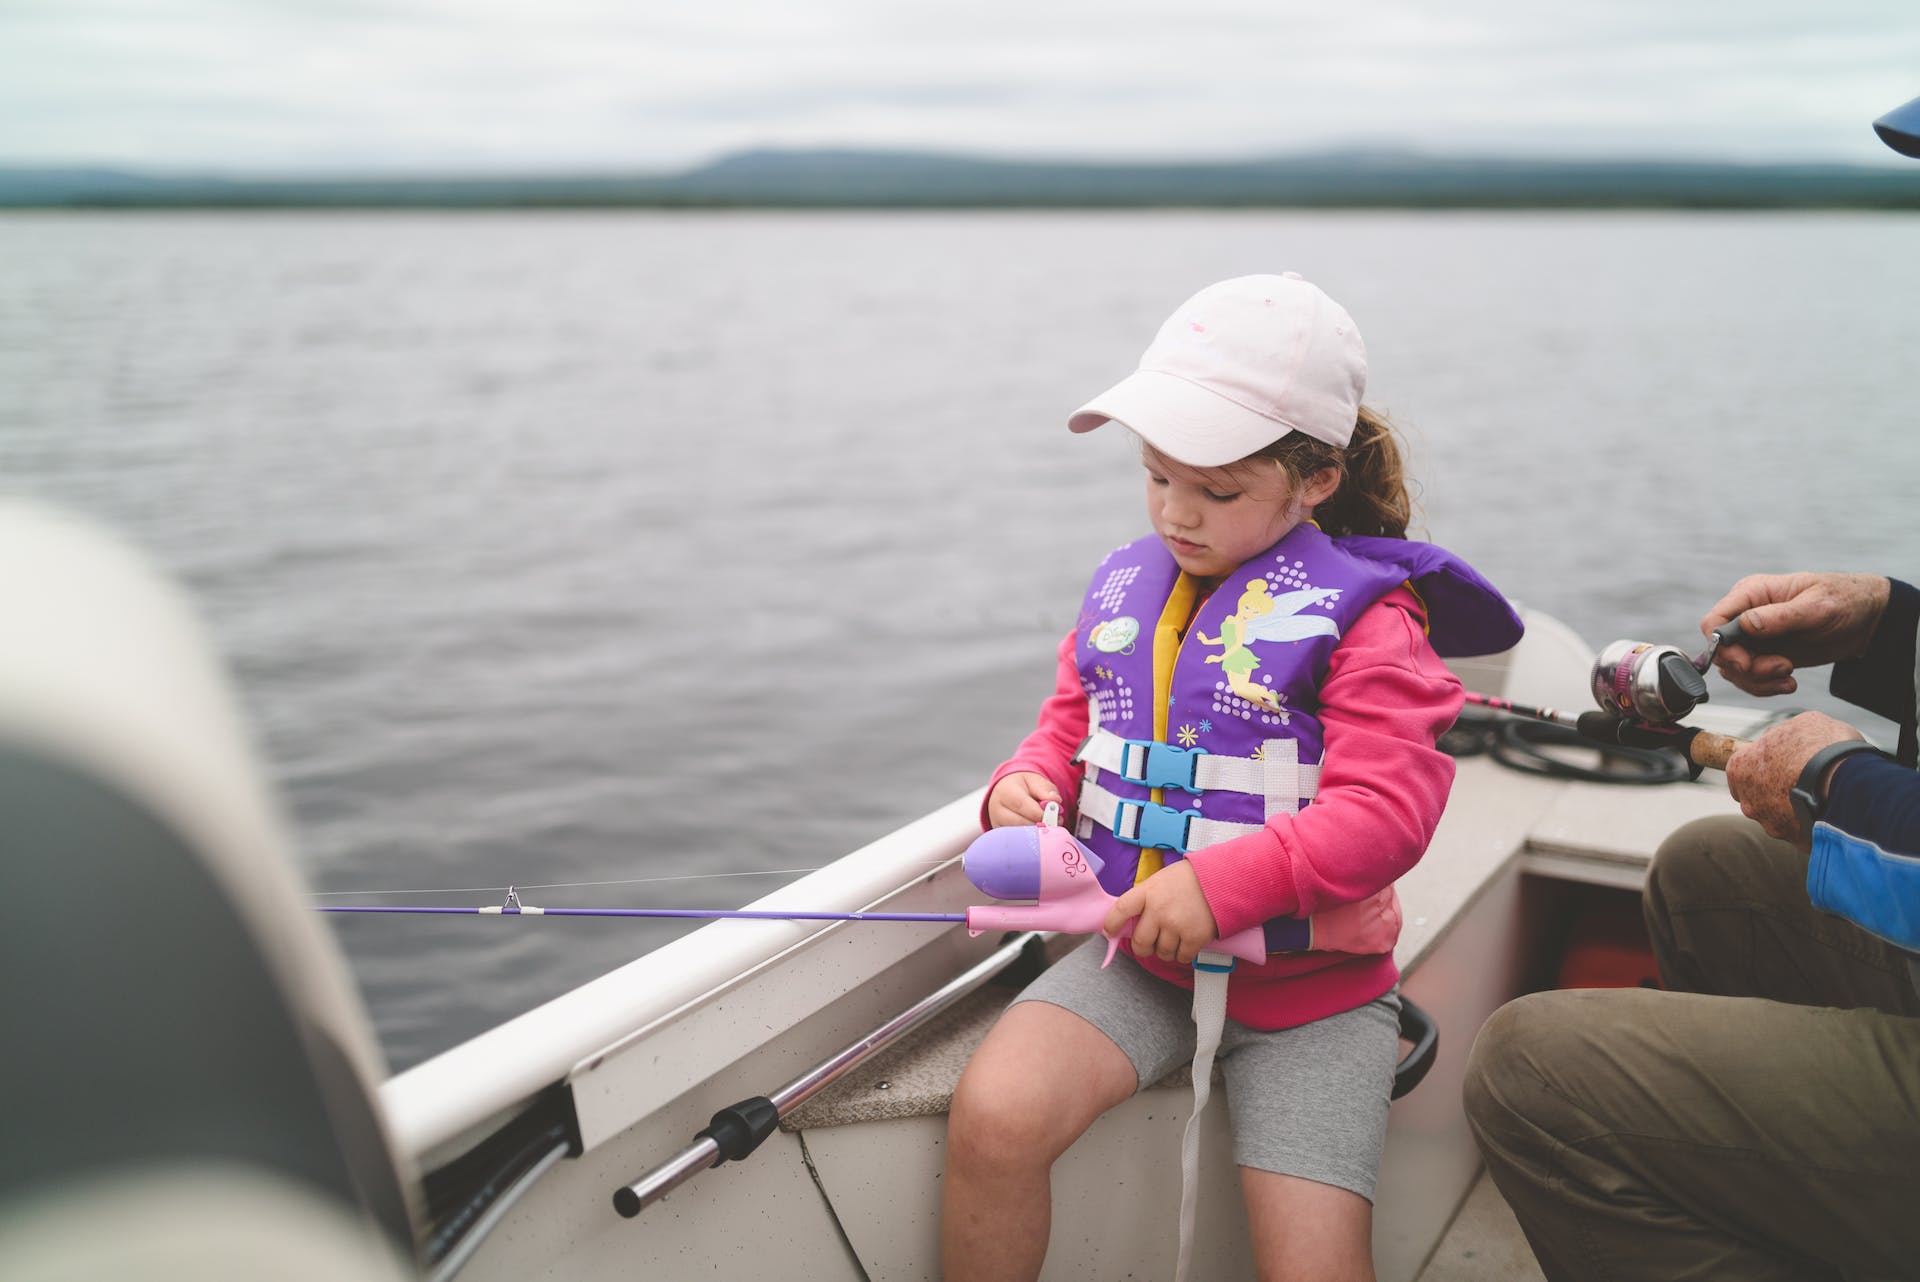 Top 10 Reasons to Wear a Life Jacket | Water Safety Tips